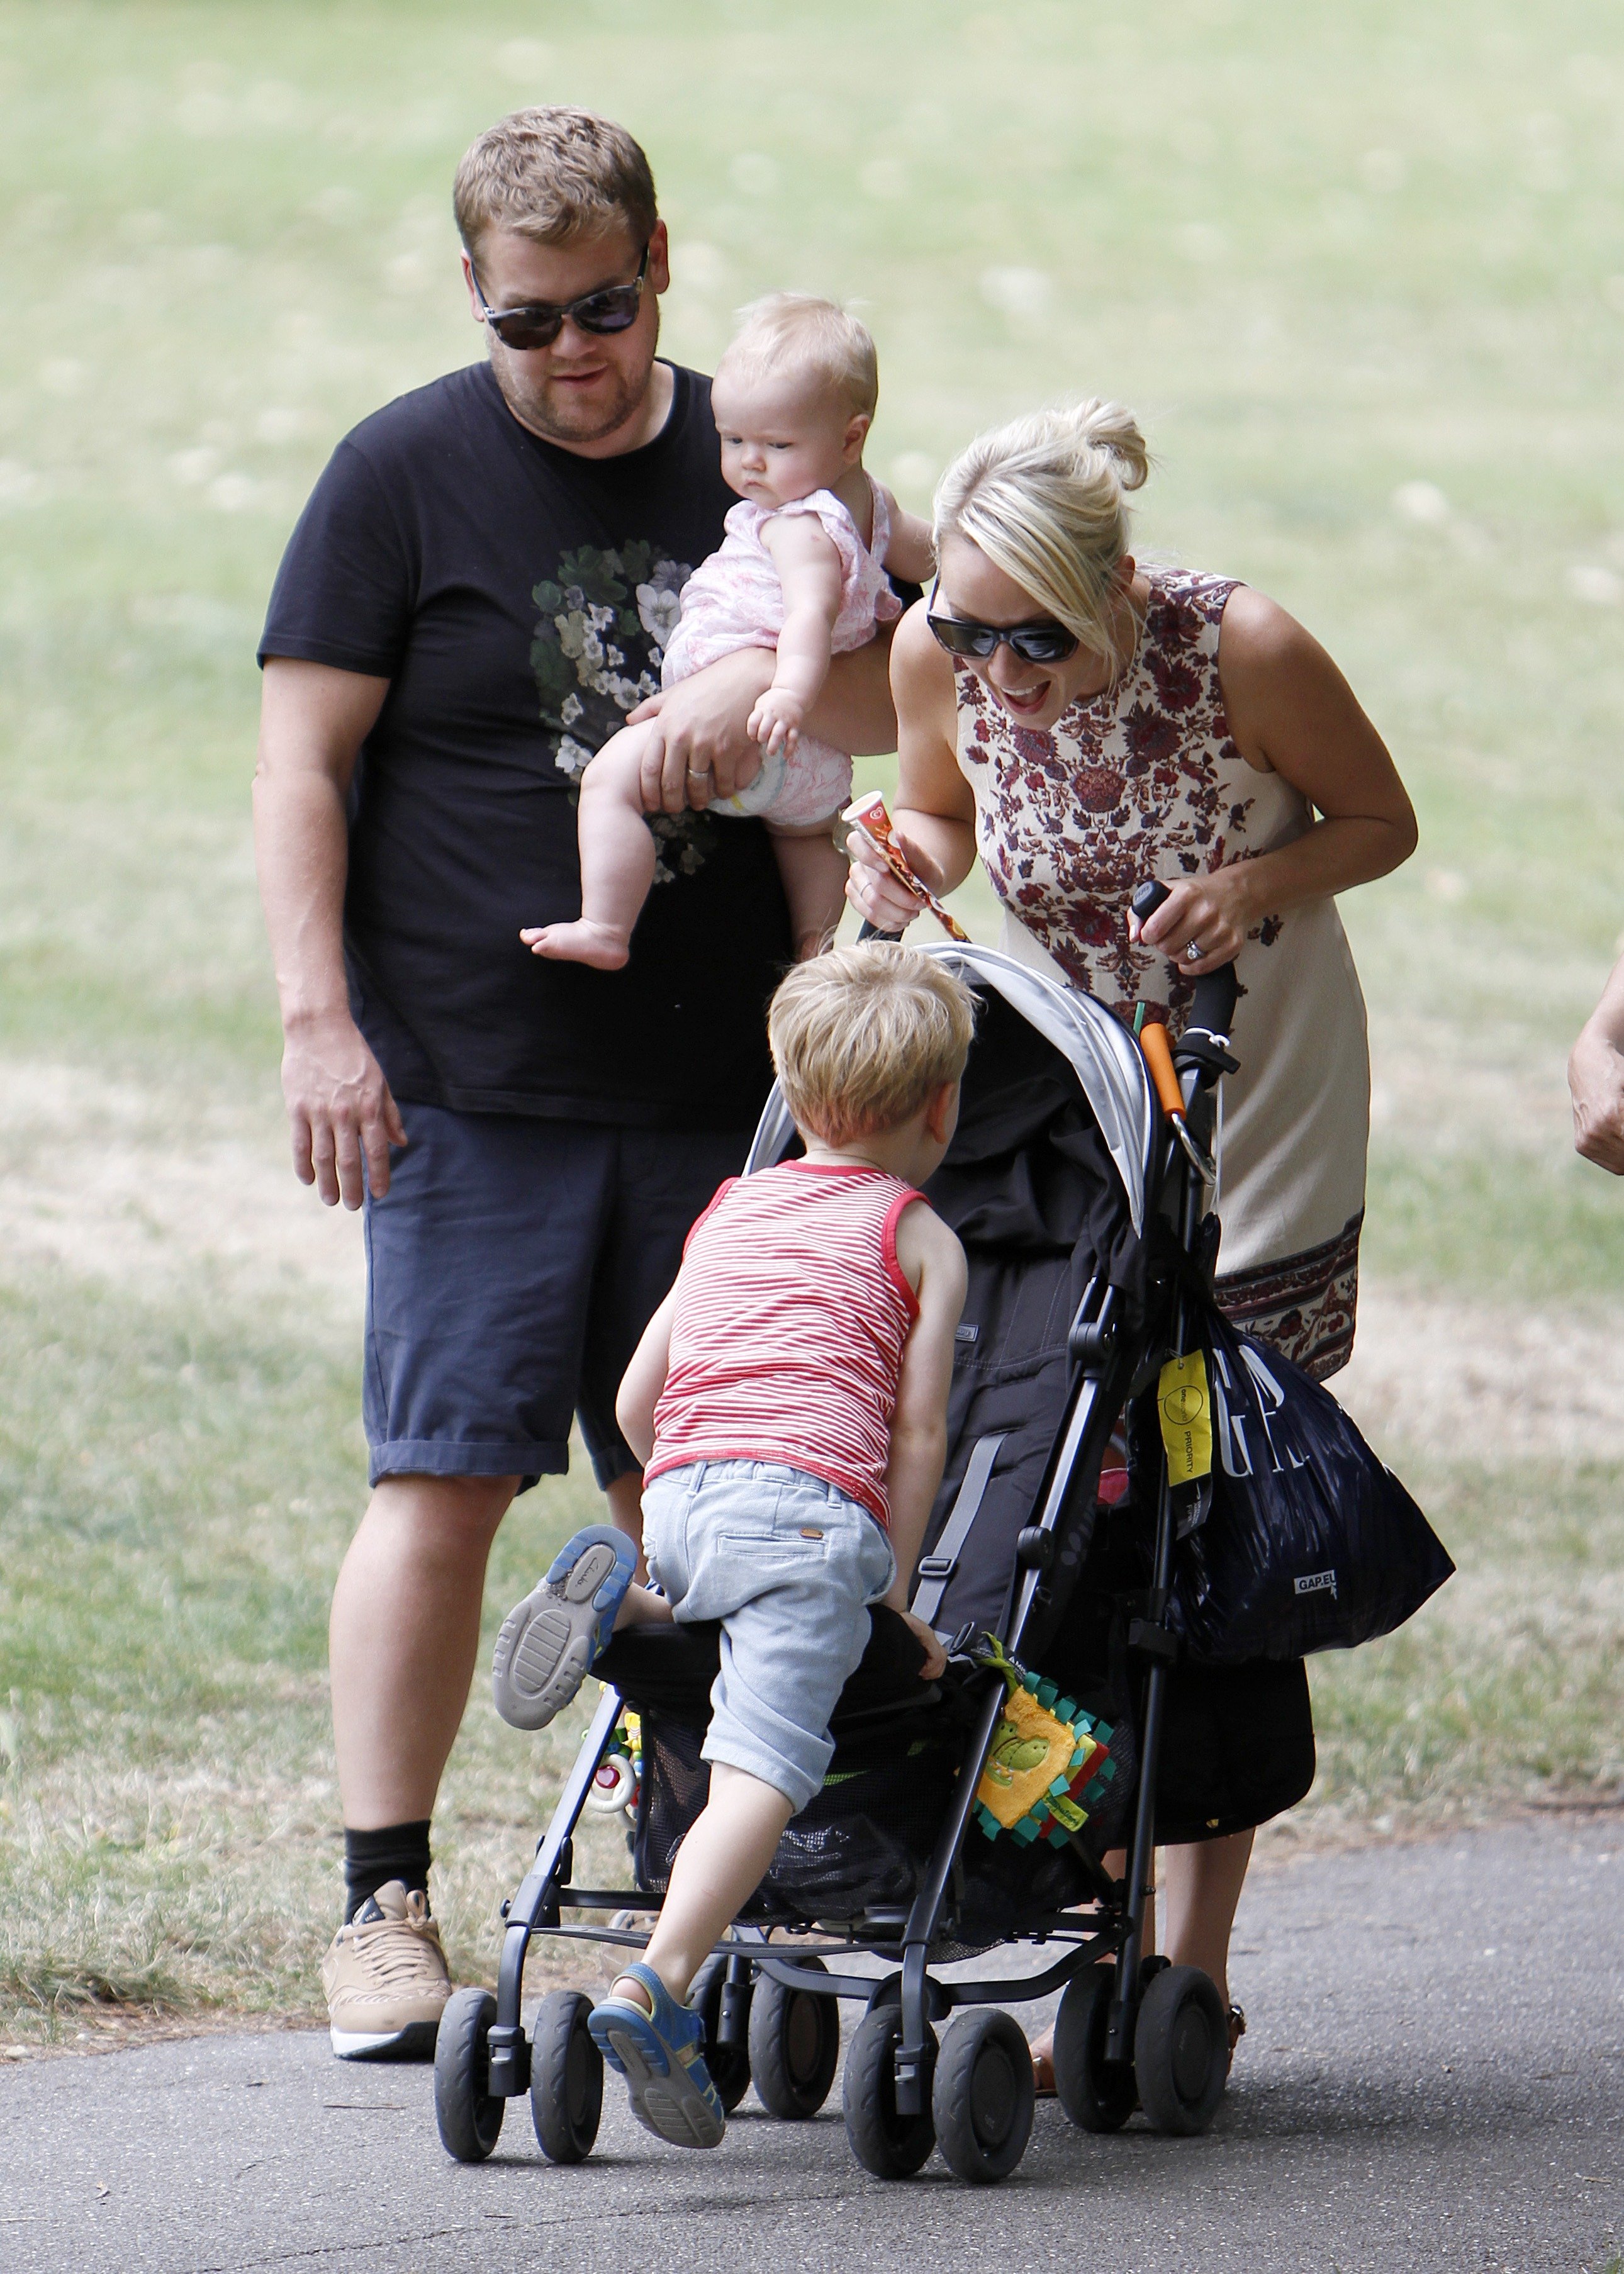 James Corden and Julia Carey talk a walk with their children in London, England on July 1, 2015 | Photo: Getty Images